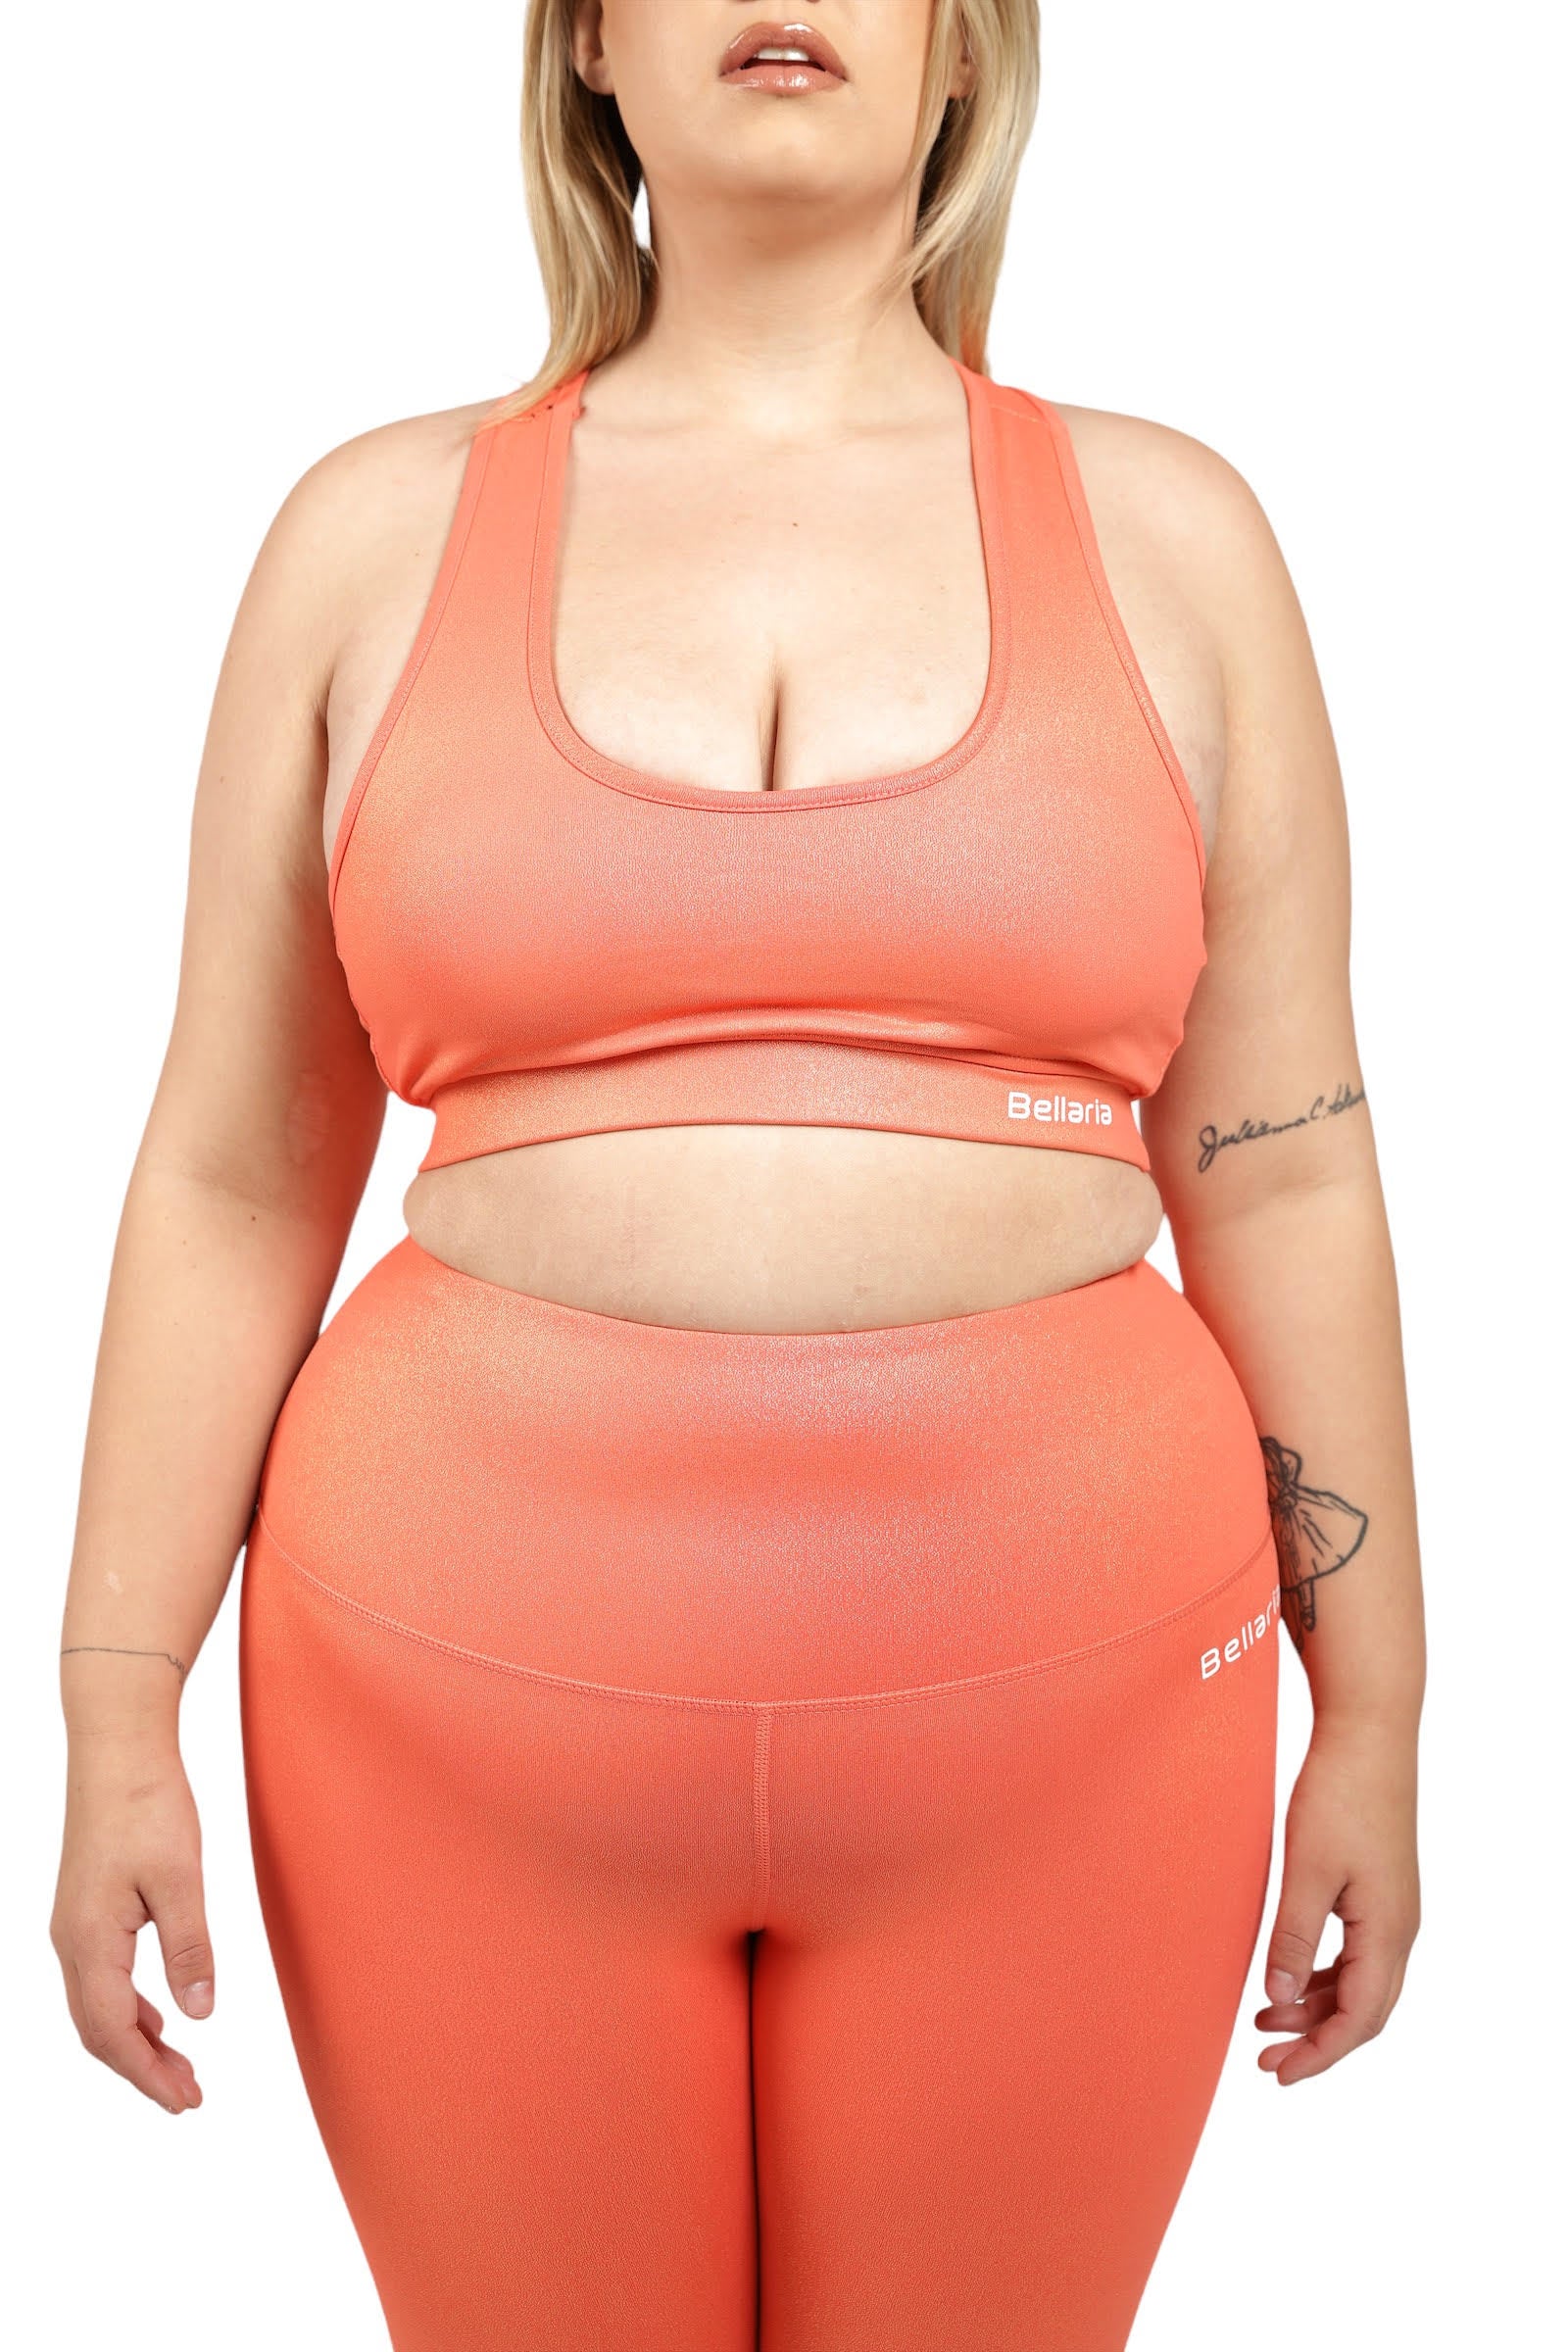 Affordable Bra and Legging Sets by Bellaria – BellariaOnline